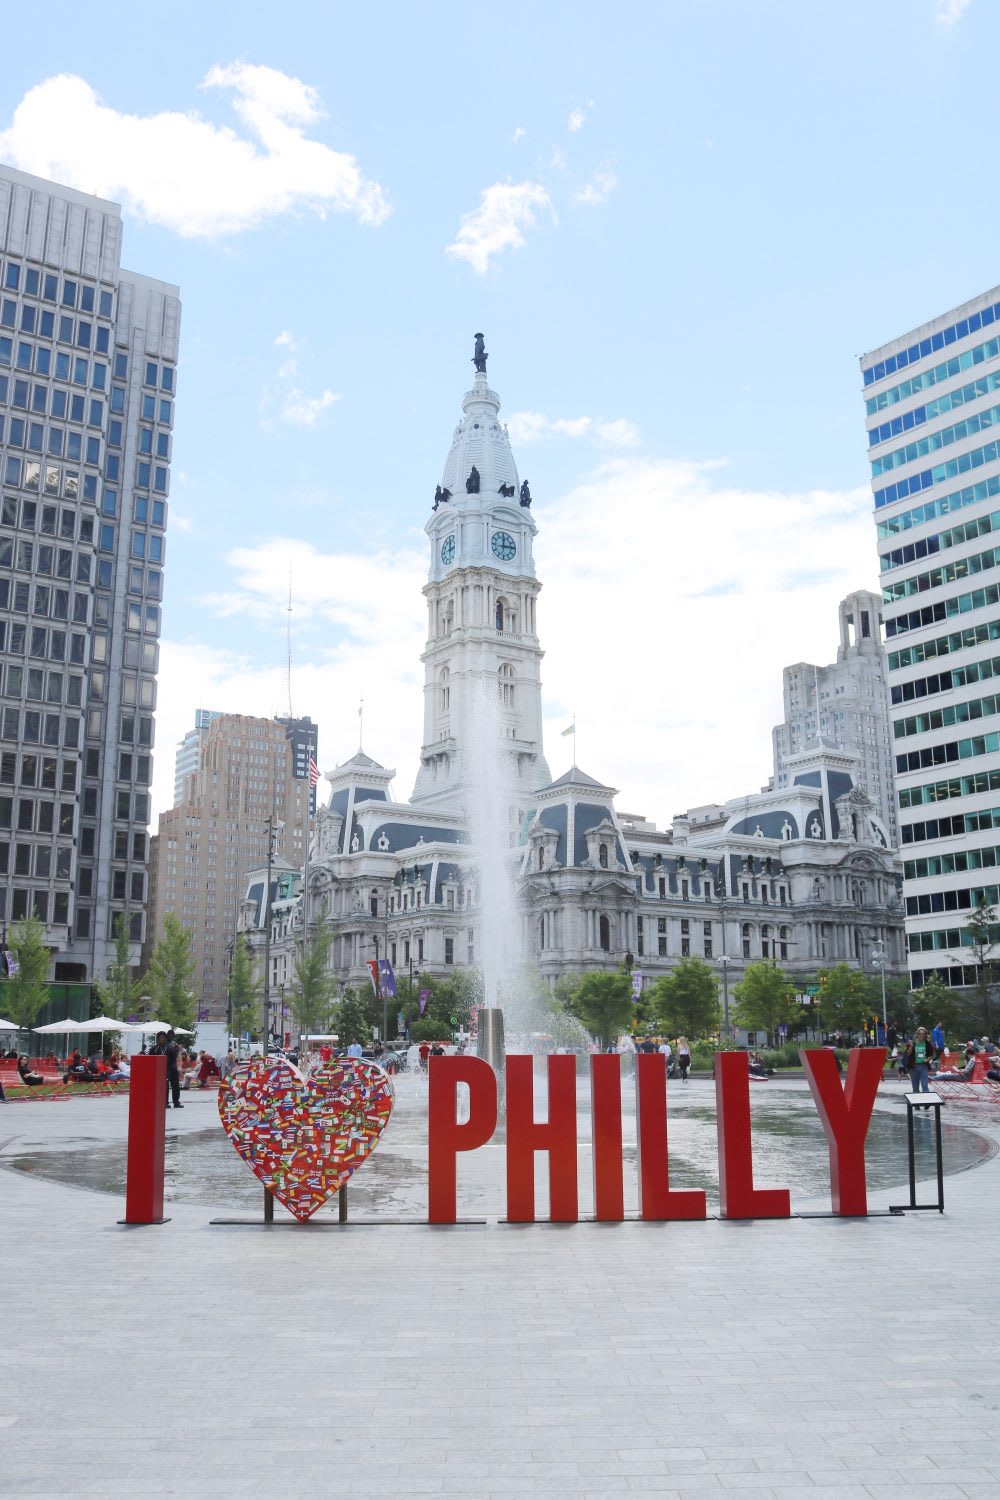 48 hours in Philadelphia: What to Do, Eat and See in Philly